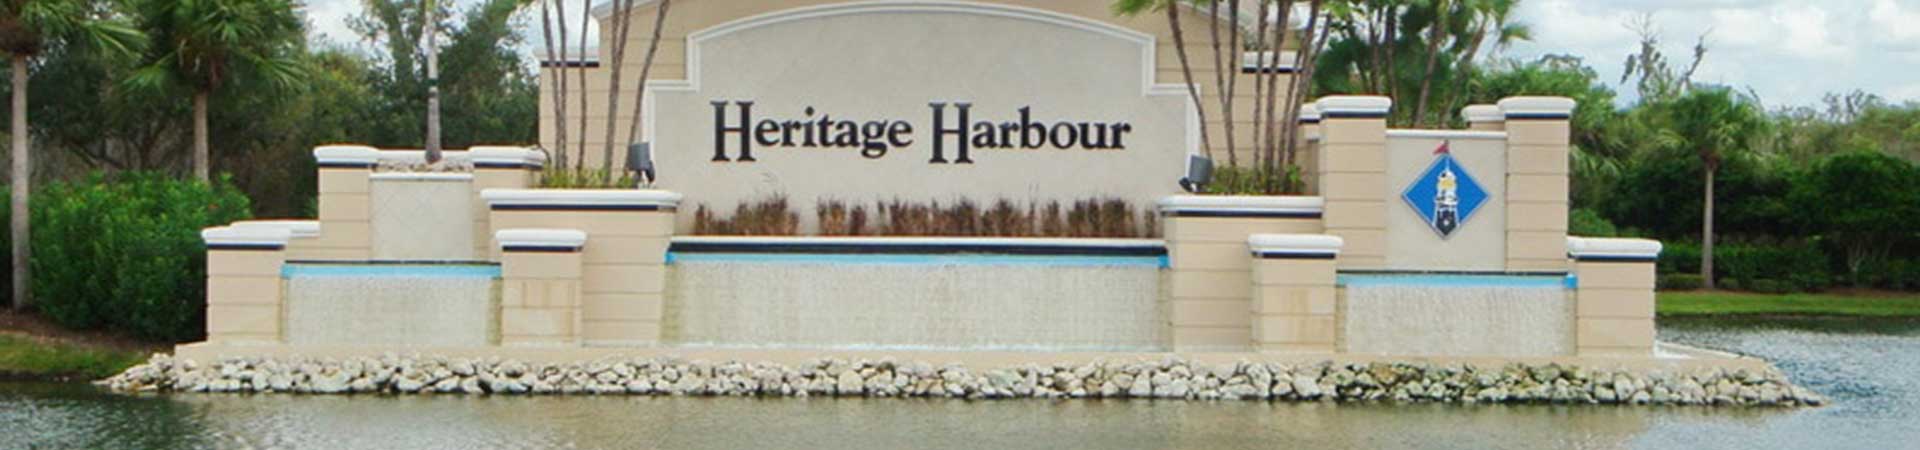 Heritage Harbour Market Place CDD Contact